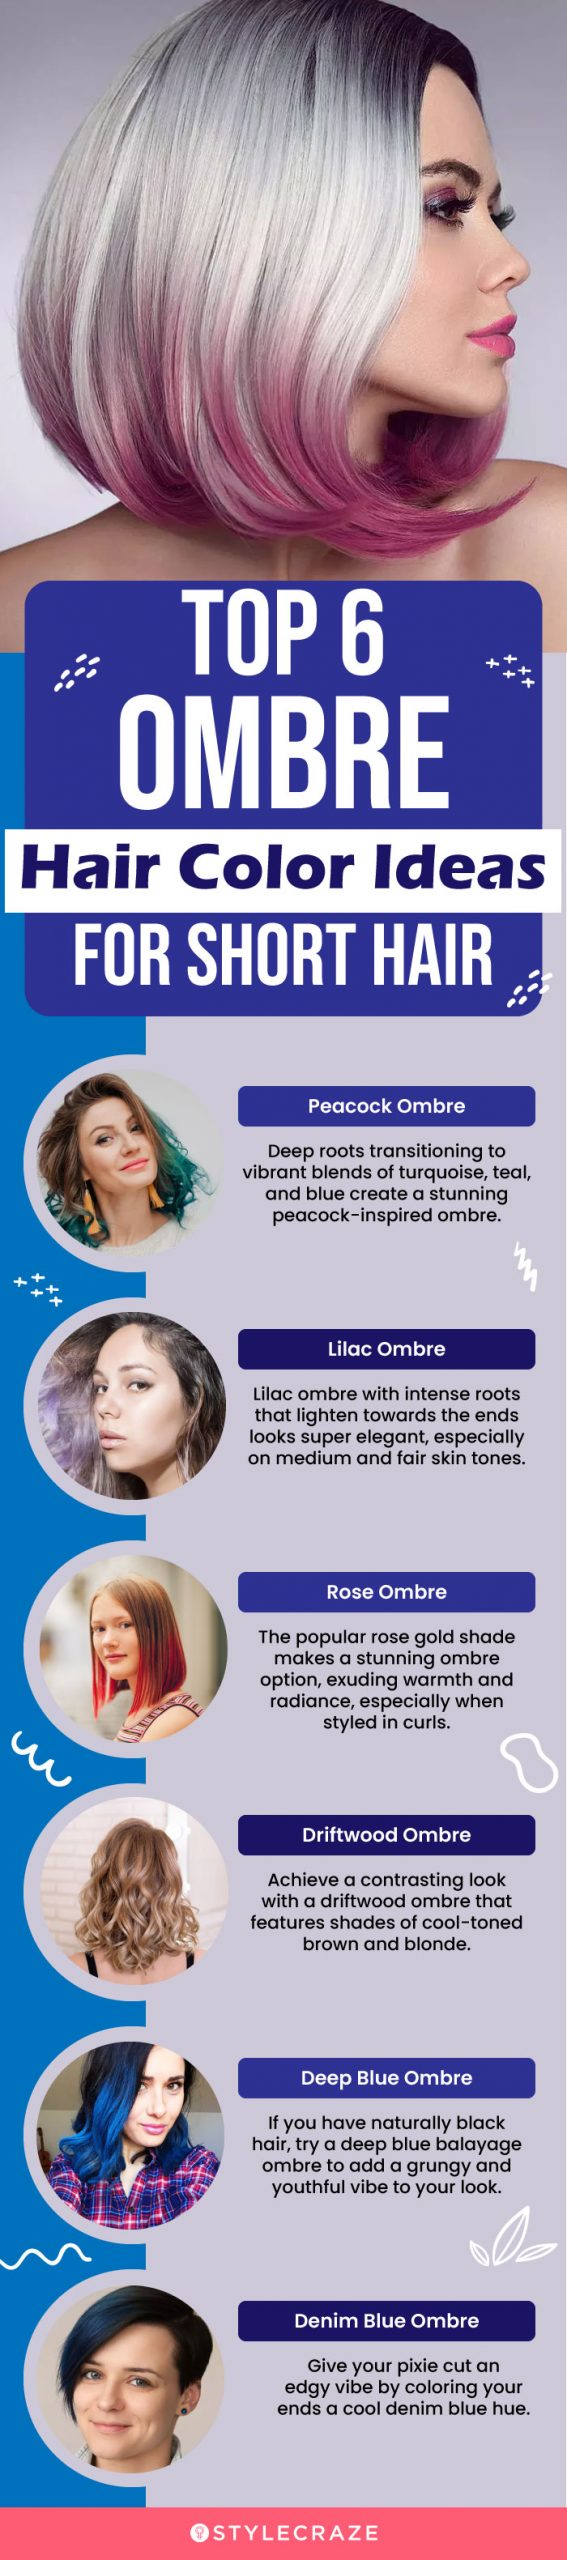 top 10 best ombre hair color ideas for short hair (infographic)